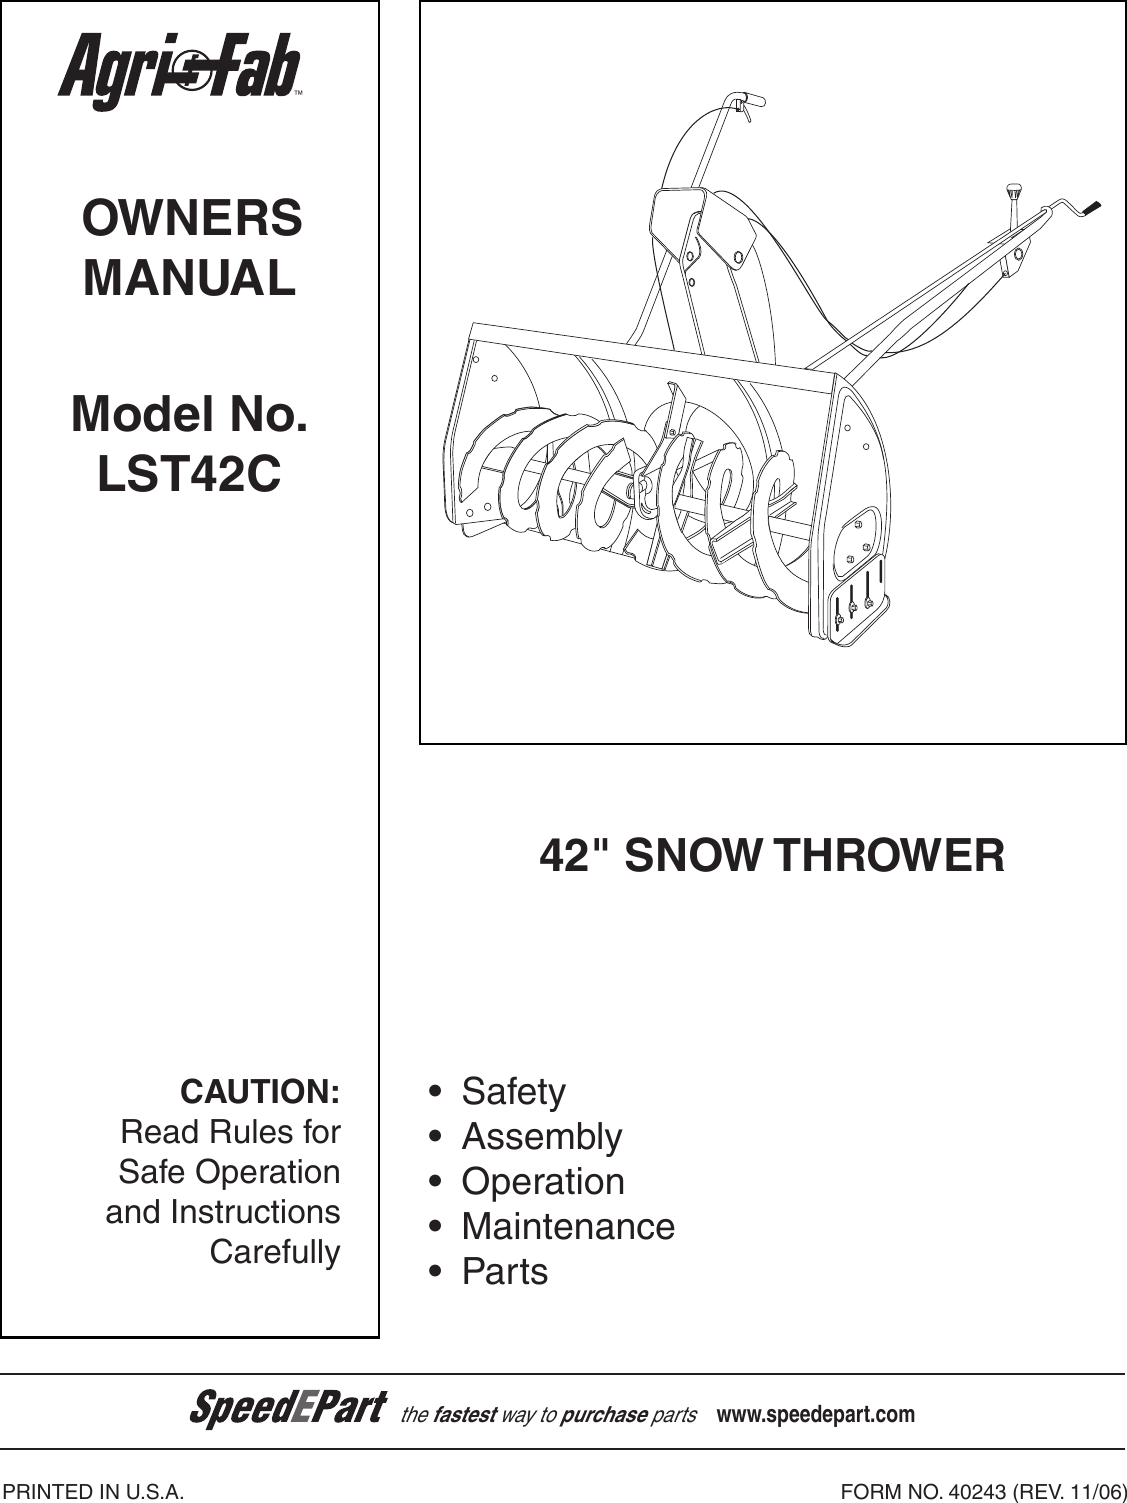 Page 2 of 11 - Husqvarna Husqvarna-Snow-Blower-Lst42C-Users-Manual- IPL, 42 Inch Two Stage Snow Thrower, 531 30 71-69, LST42C, 2008-01, Accessory (Ride Mower)  Husqvarna-snow-blower-lst42c-users-manual